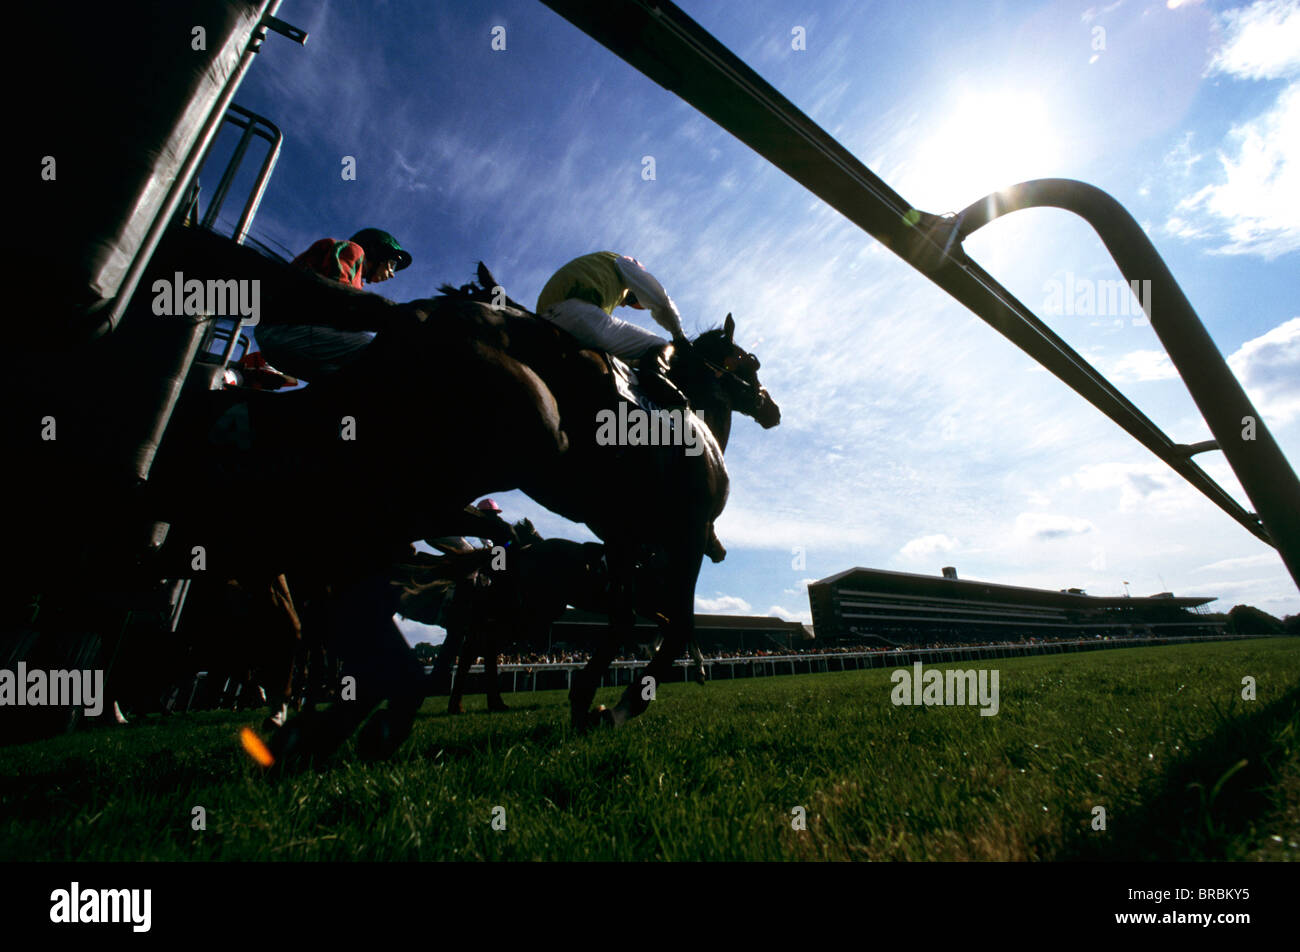 Horses release out of starting gate in horse race Stock Photo